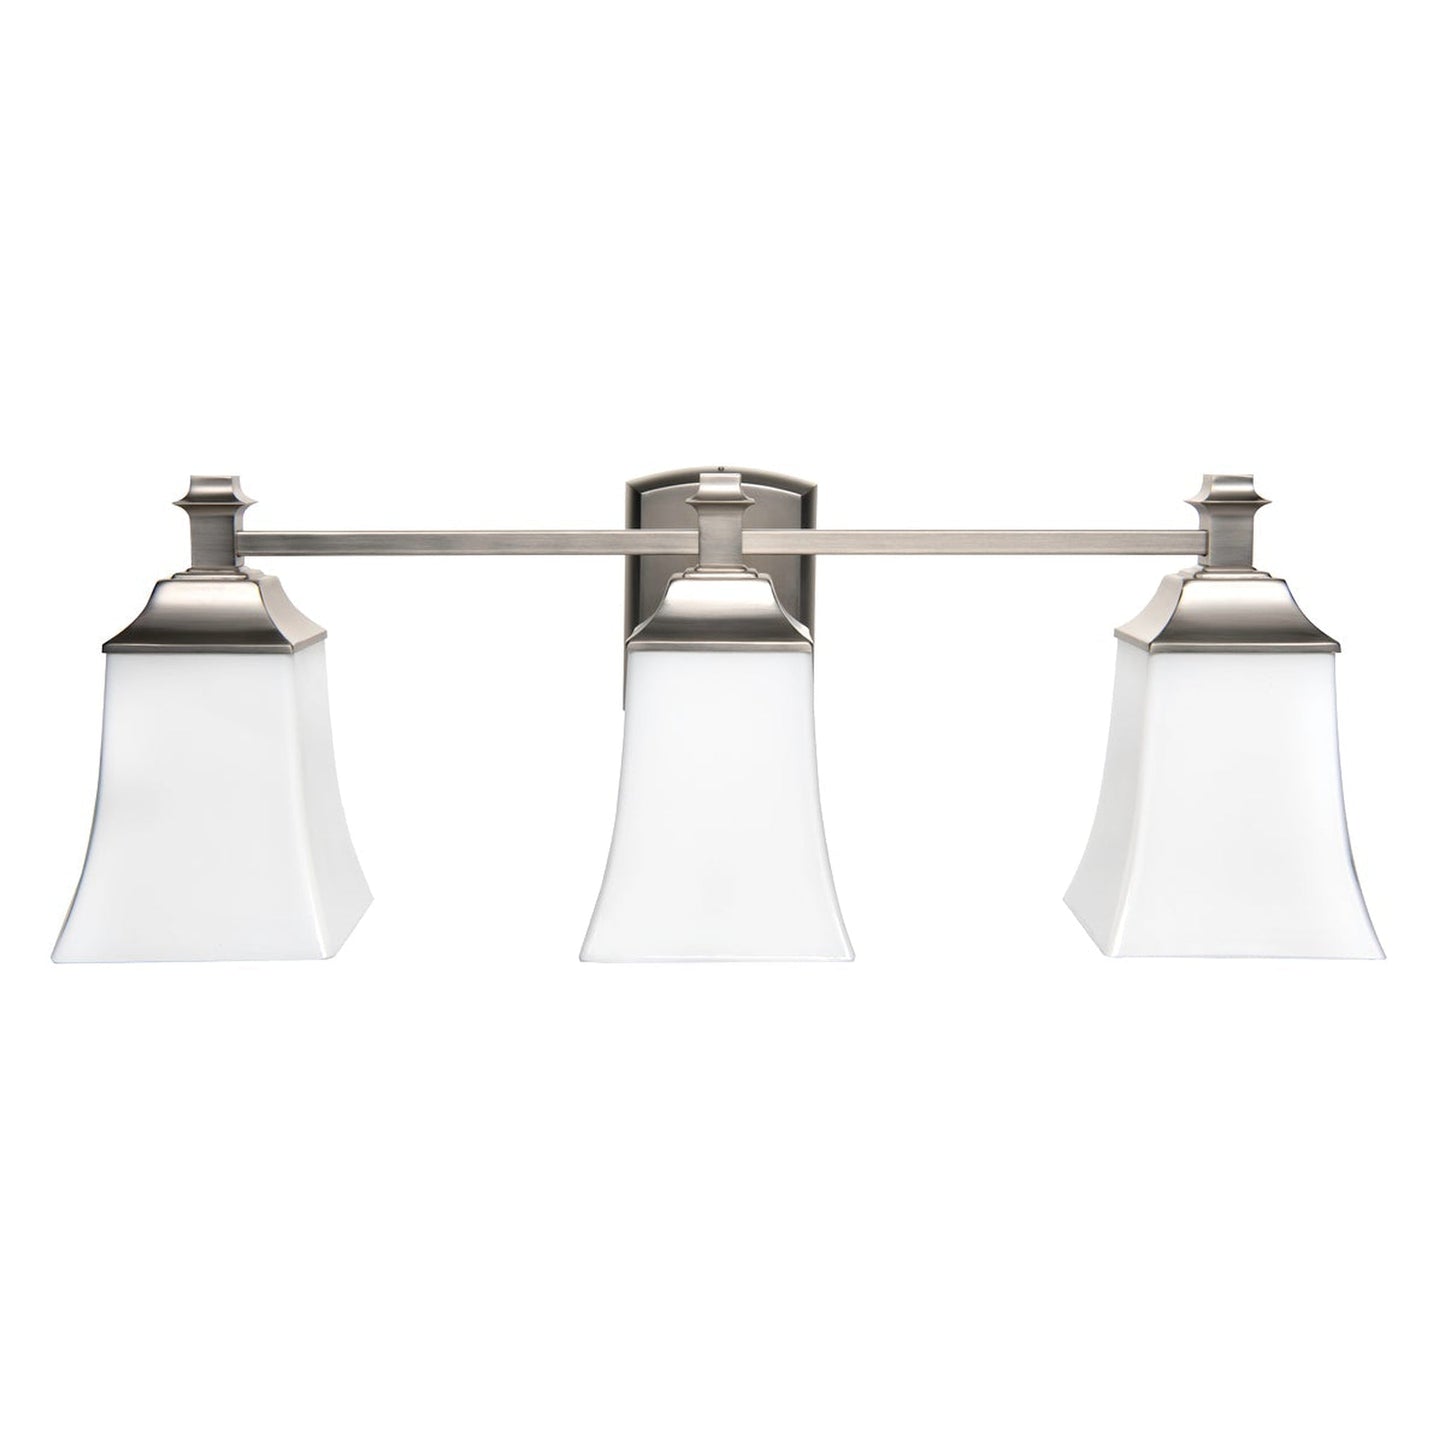 Norwell Lighting Sapphire 6" x 24" 3-Light Sconce Brushed Nickel Vanity Light With Shiny Opal Glass Diffuser